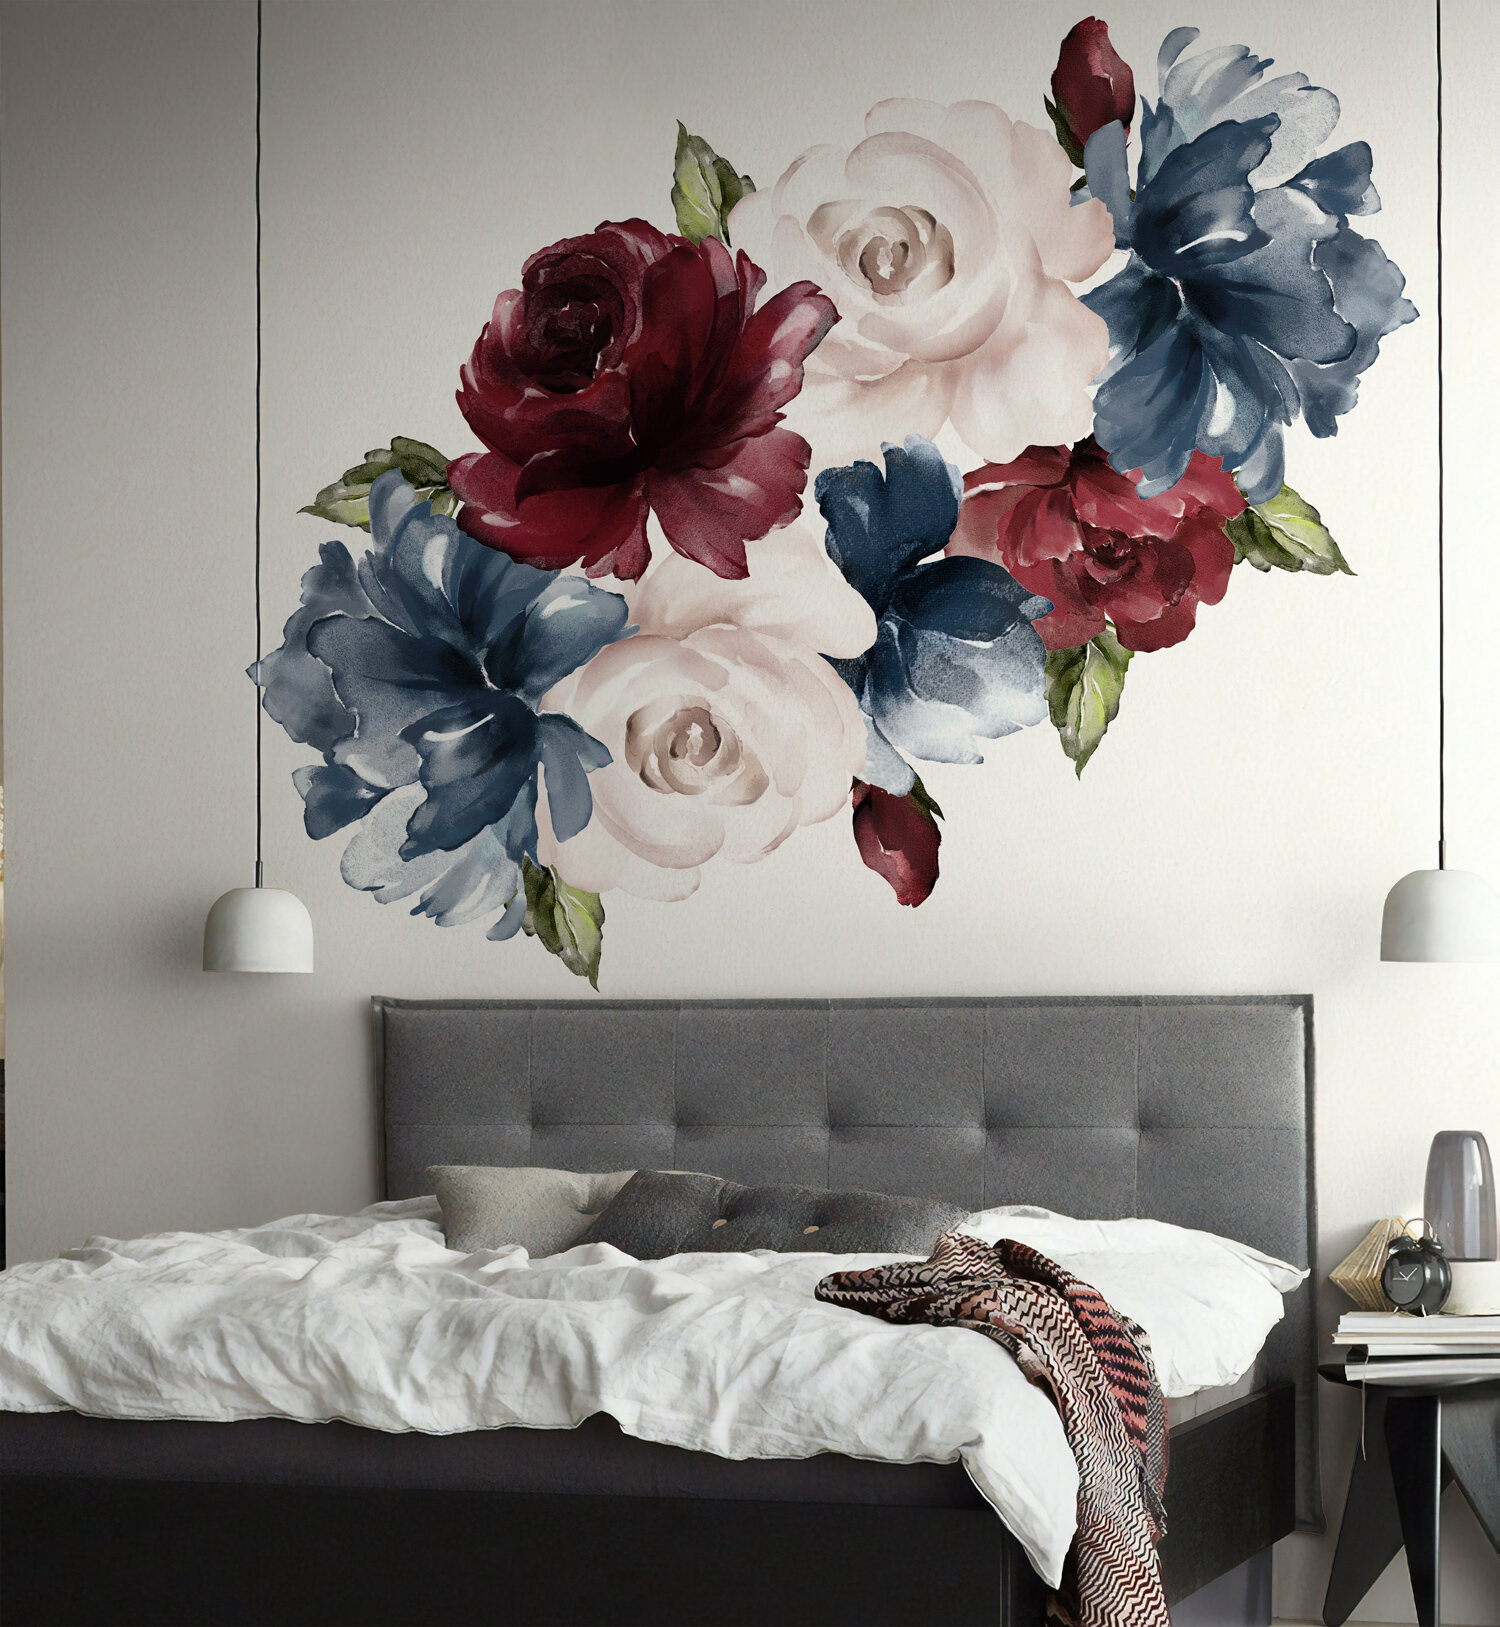 Peony Flowers Wall Decals Peel and Stick Rose Wall Sticker for Home Bedroom Nursery Room Wall Decor Flower, 1 Set 